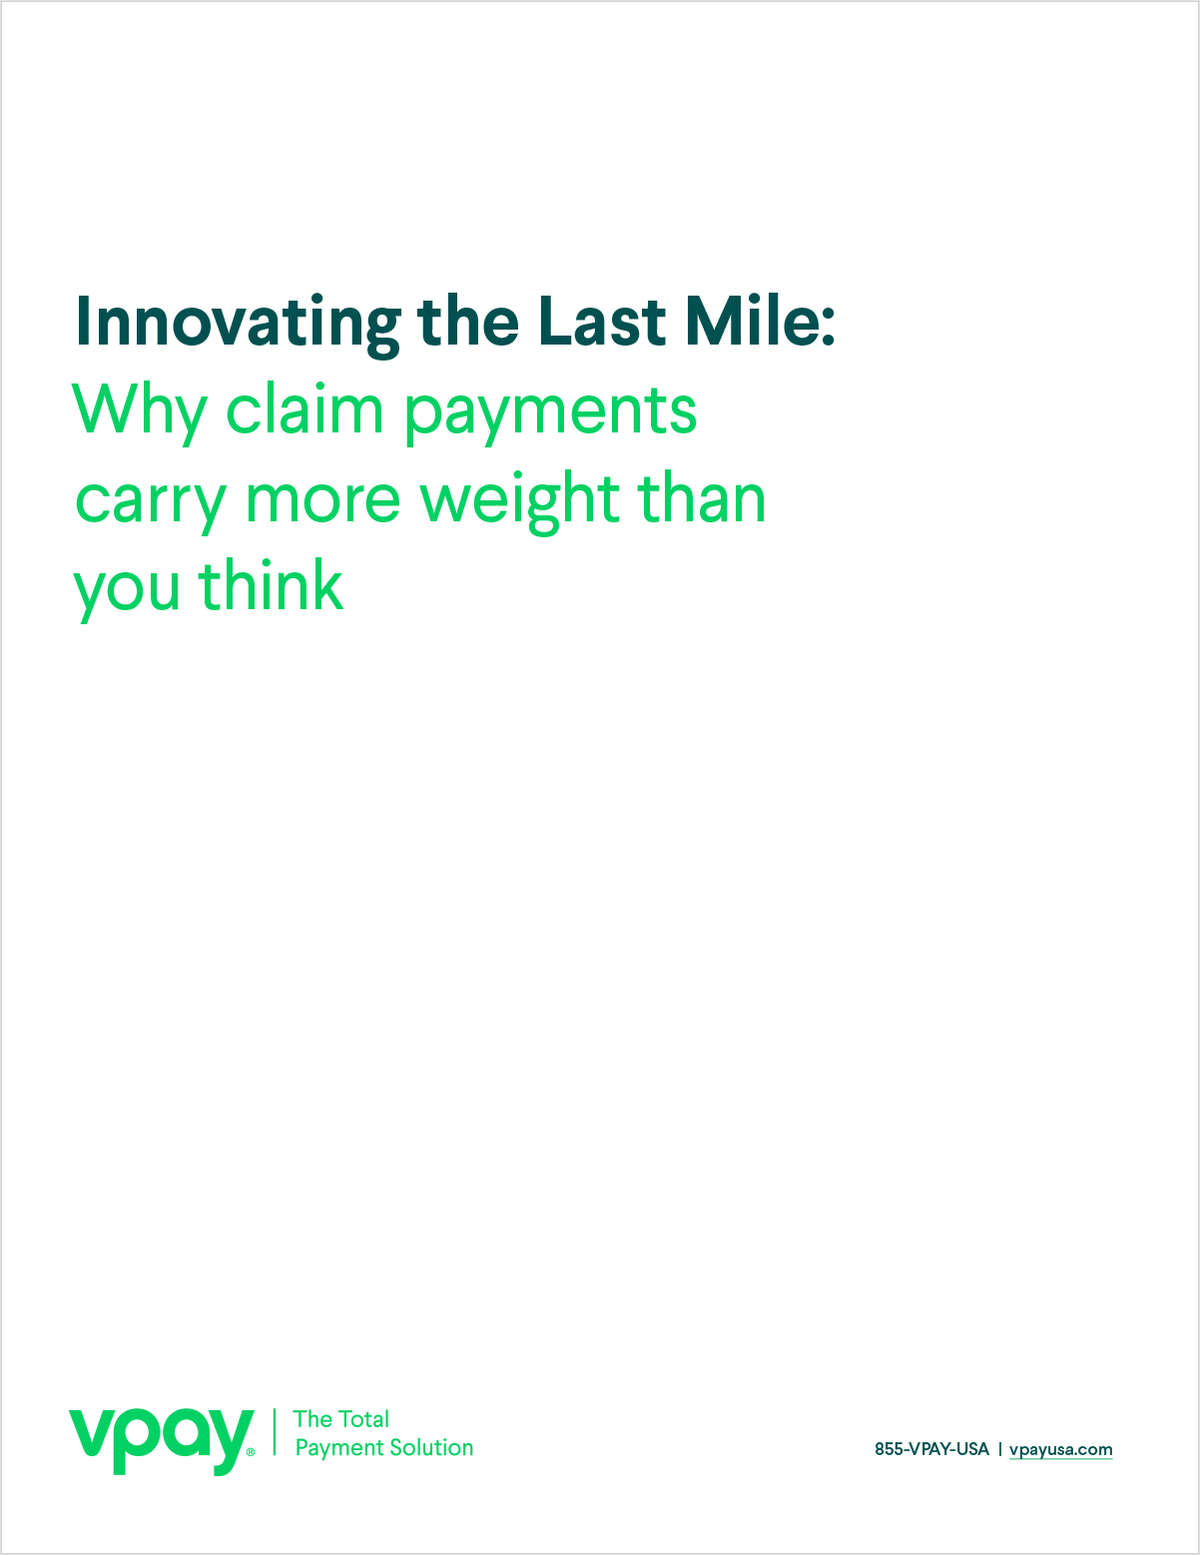 Innovating the Last Mile: Why claim payments carry more weight than you think